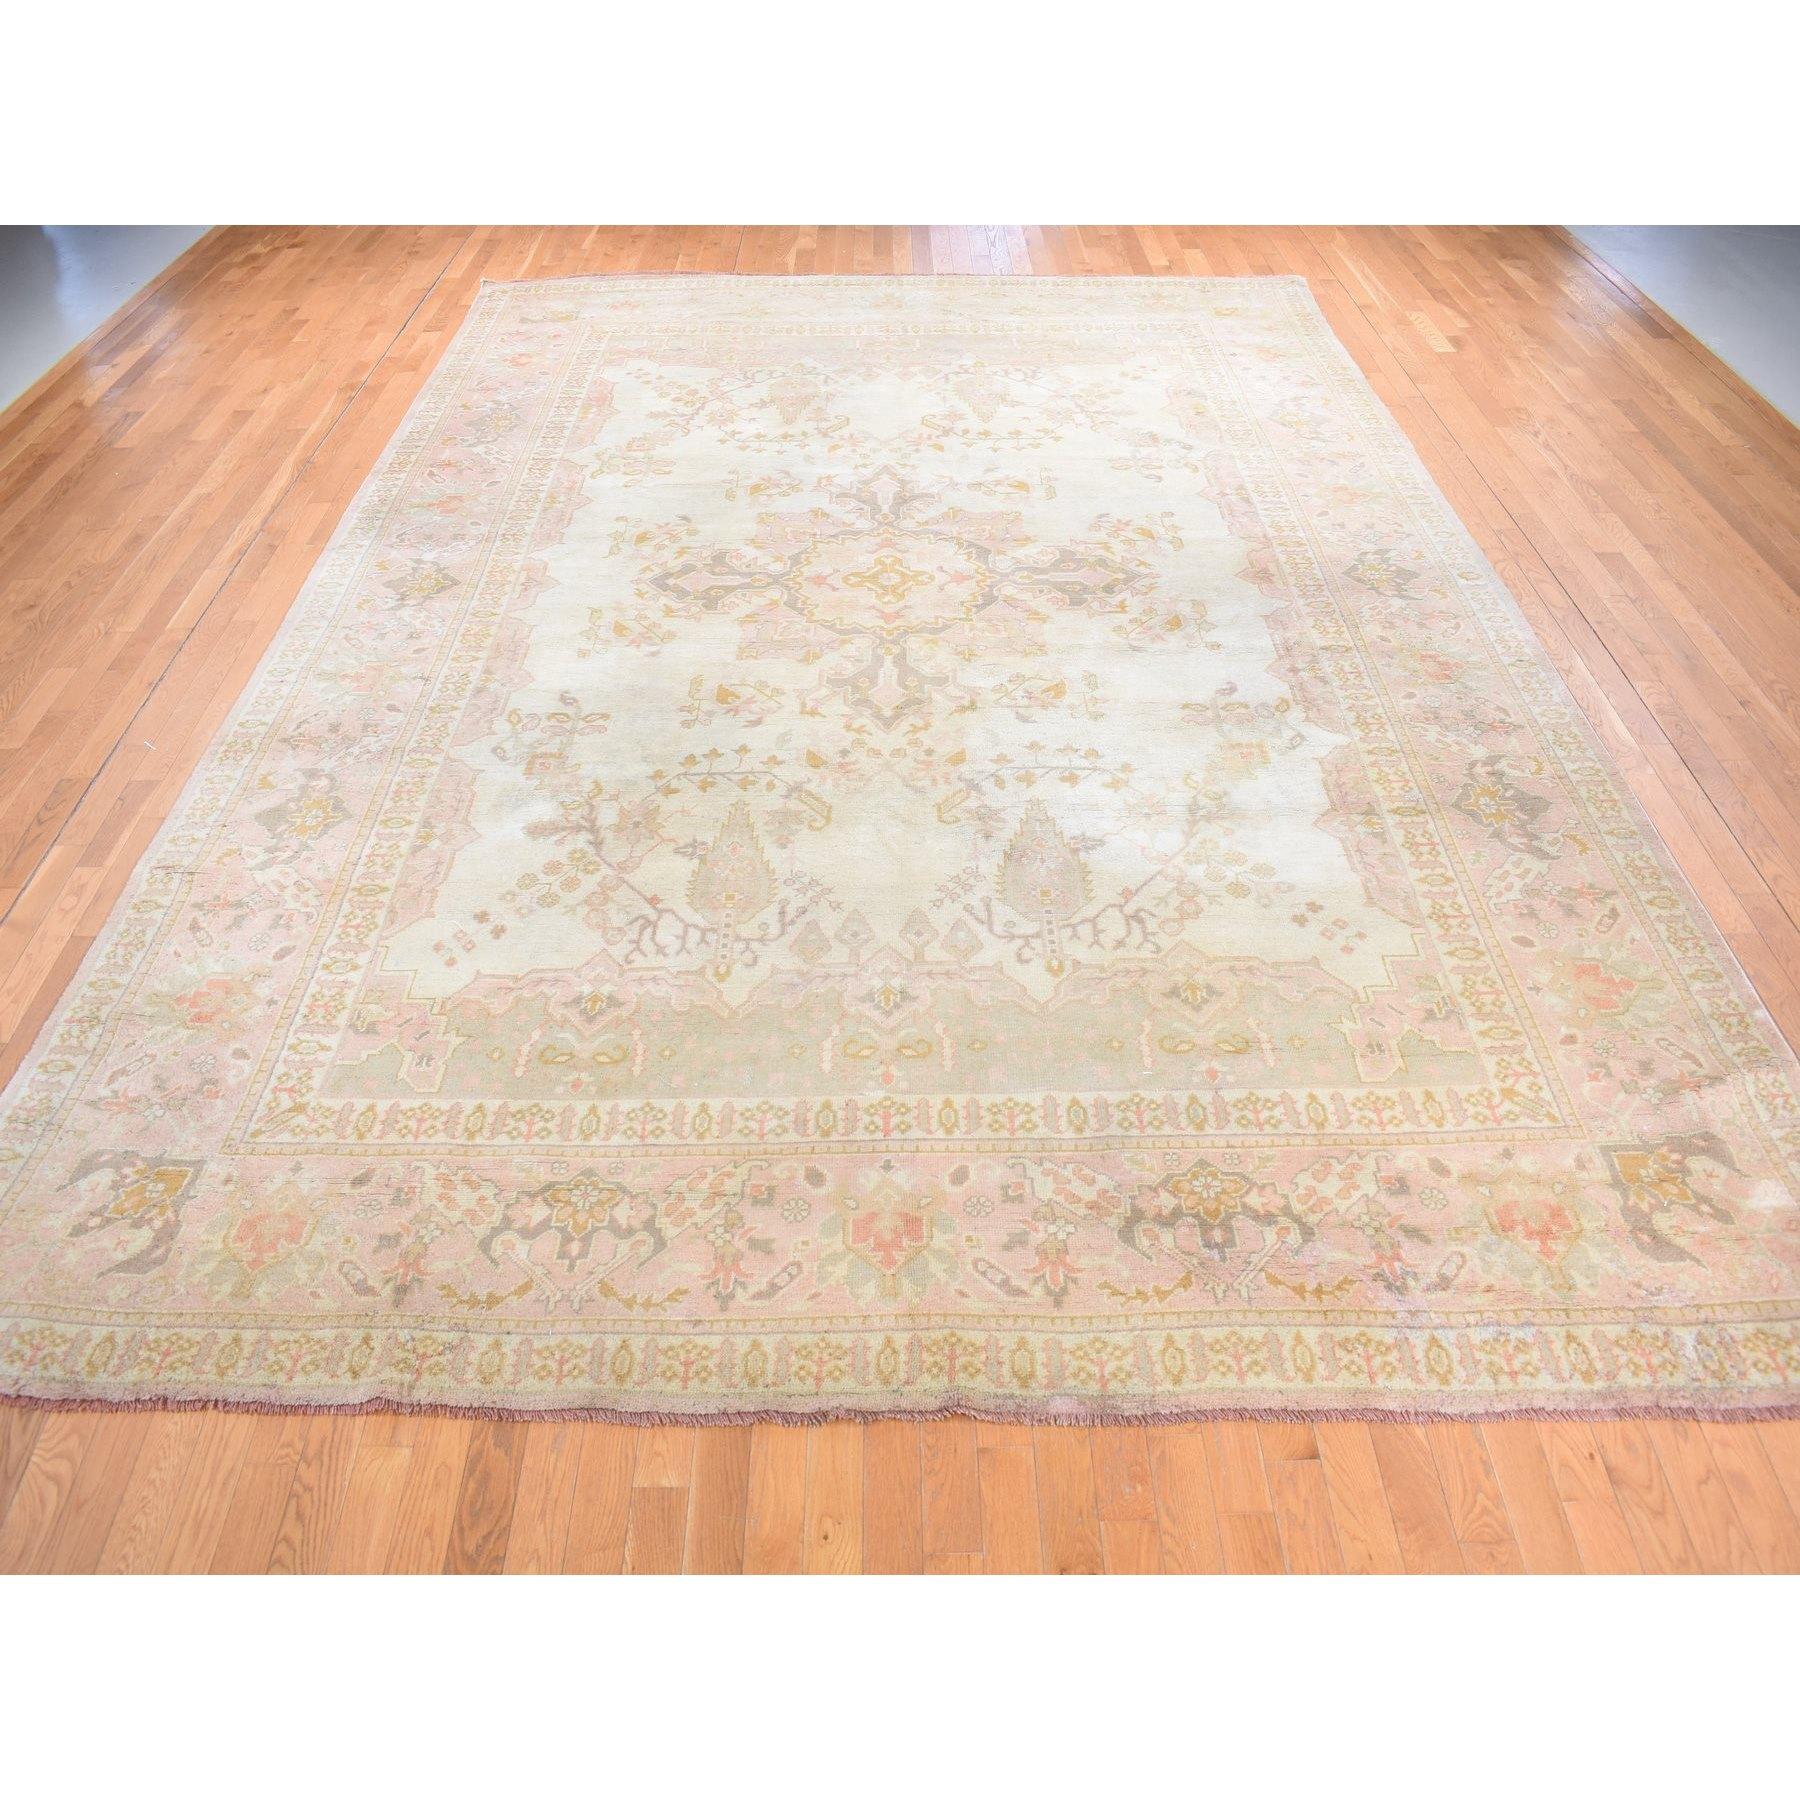 Medieval Cream Color Antique Turkish Oushak Clean Hand Knotted Pure Wool Oversized Rug For Sale